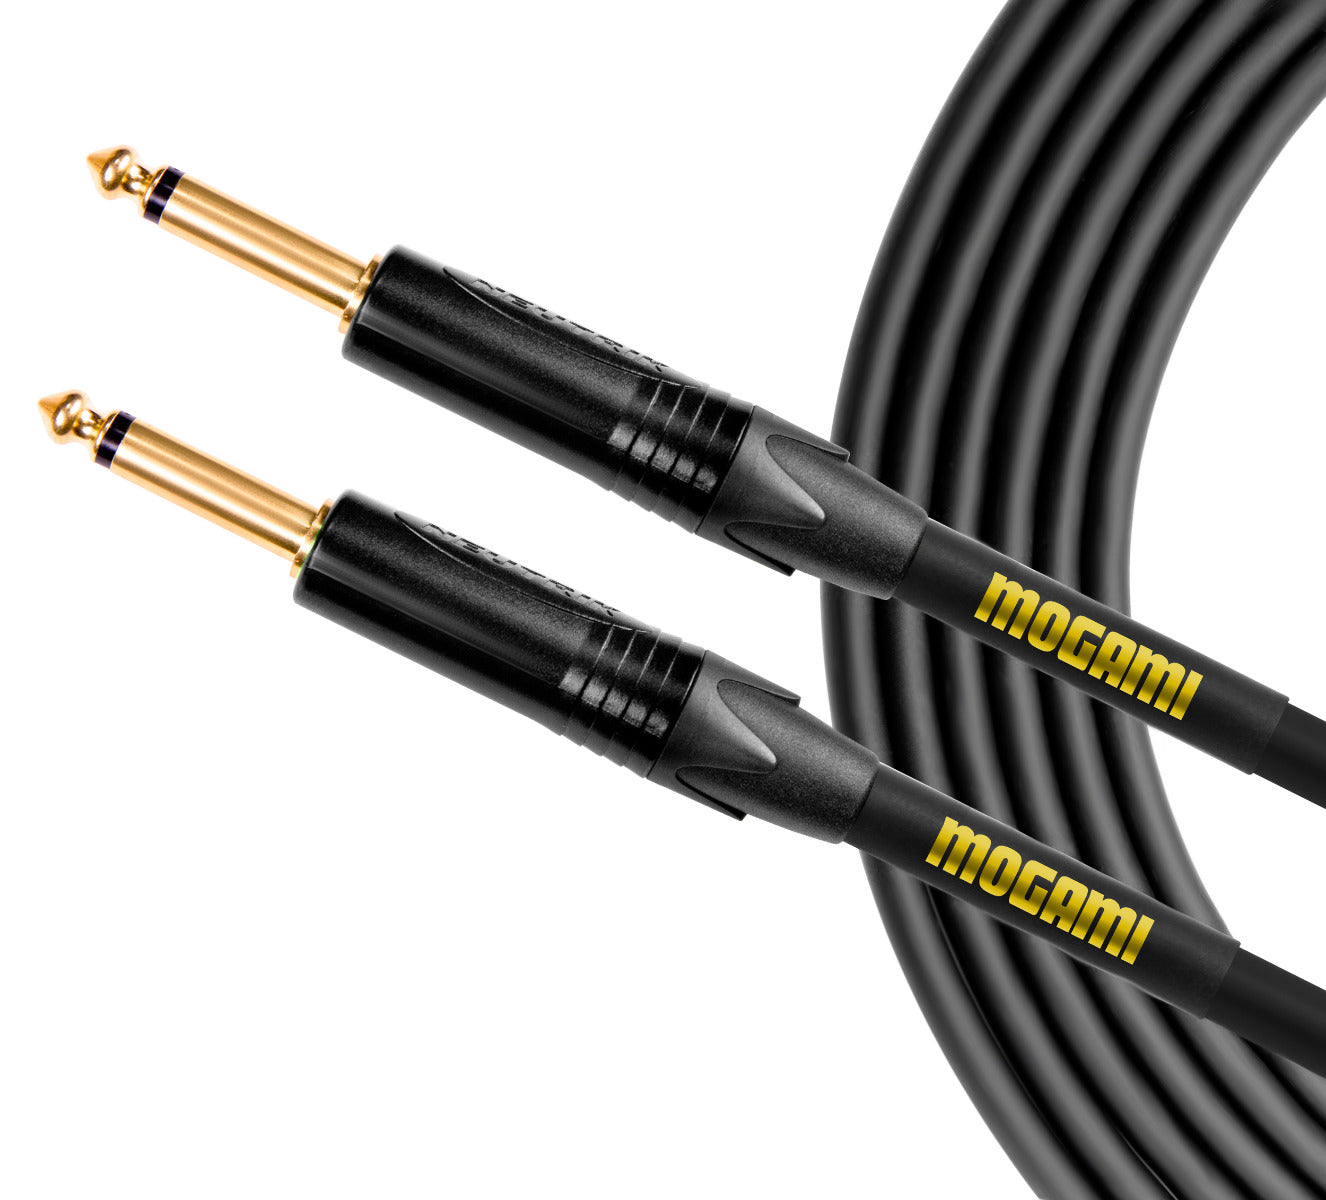 Mogami Gold Instrument Cable - 18'